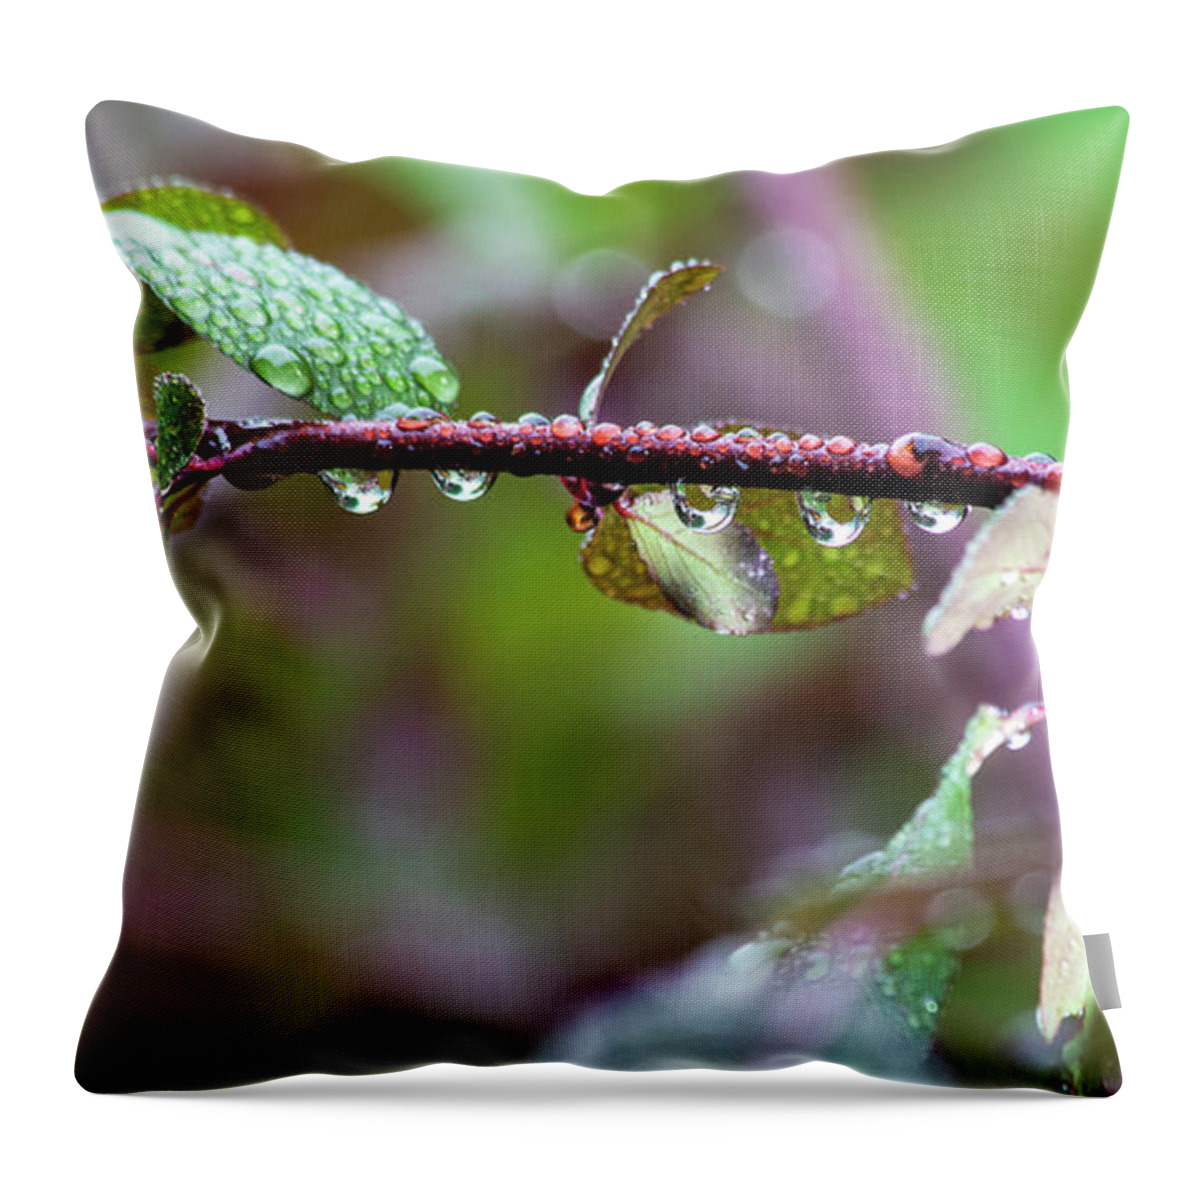 2018 June Throw Pillow featuring the photograph Dewdrop Adornment by Bill Kesler